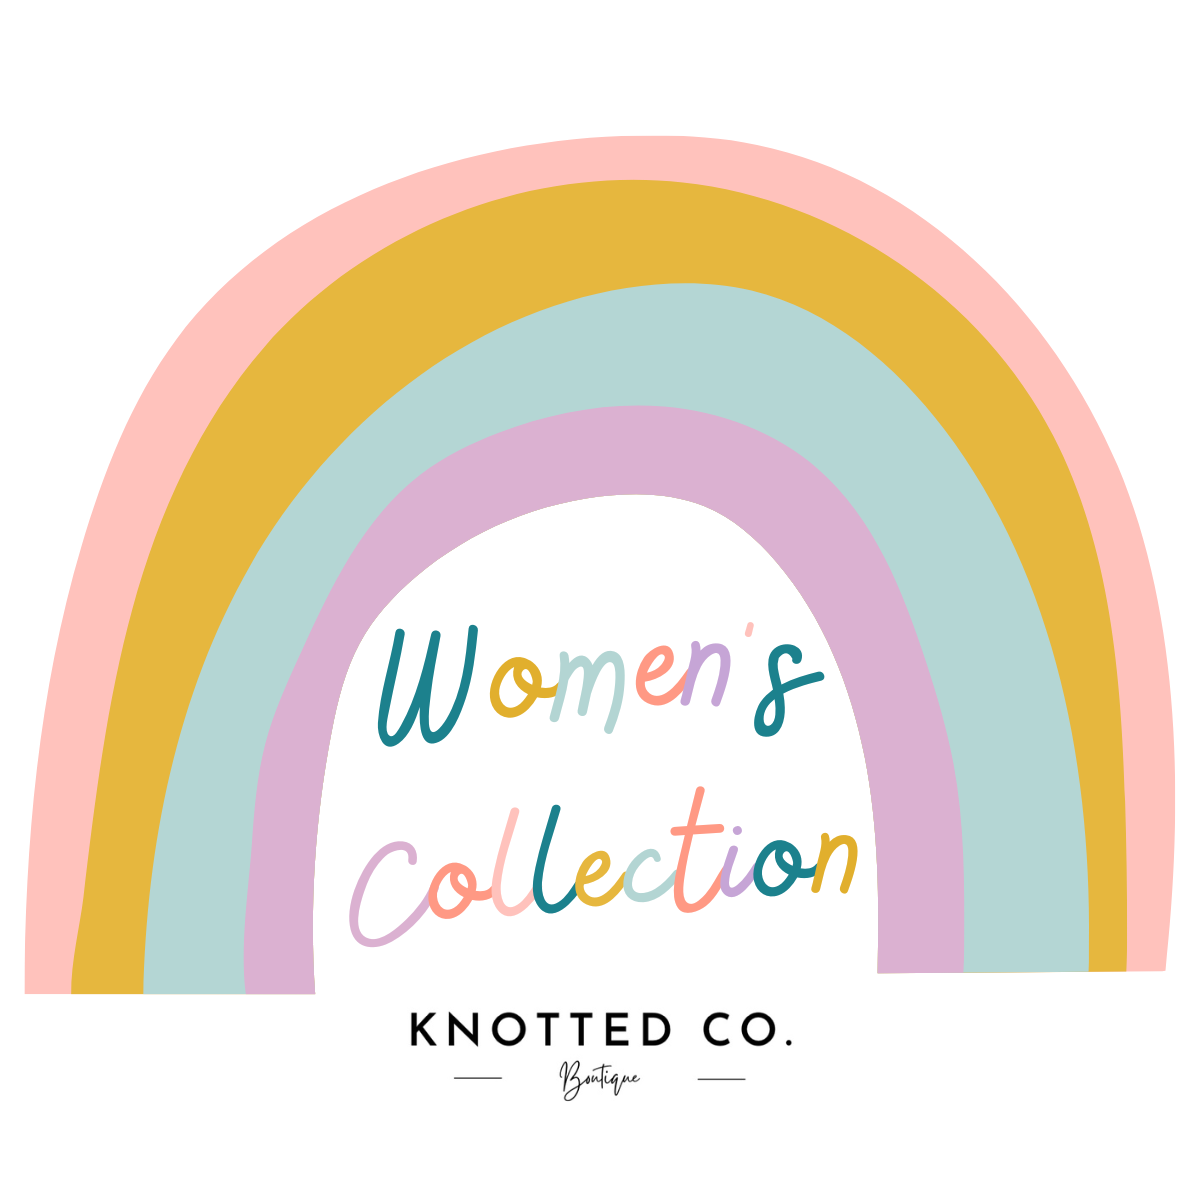 Women's Collection